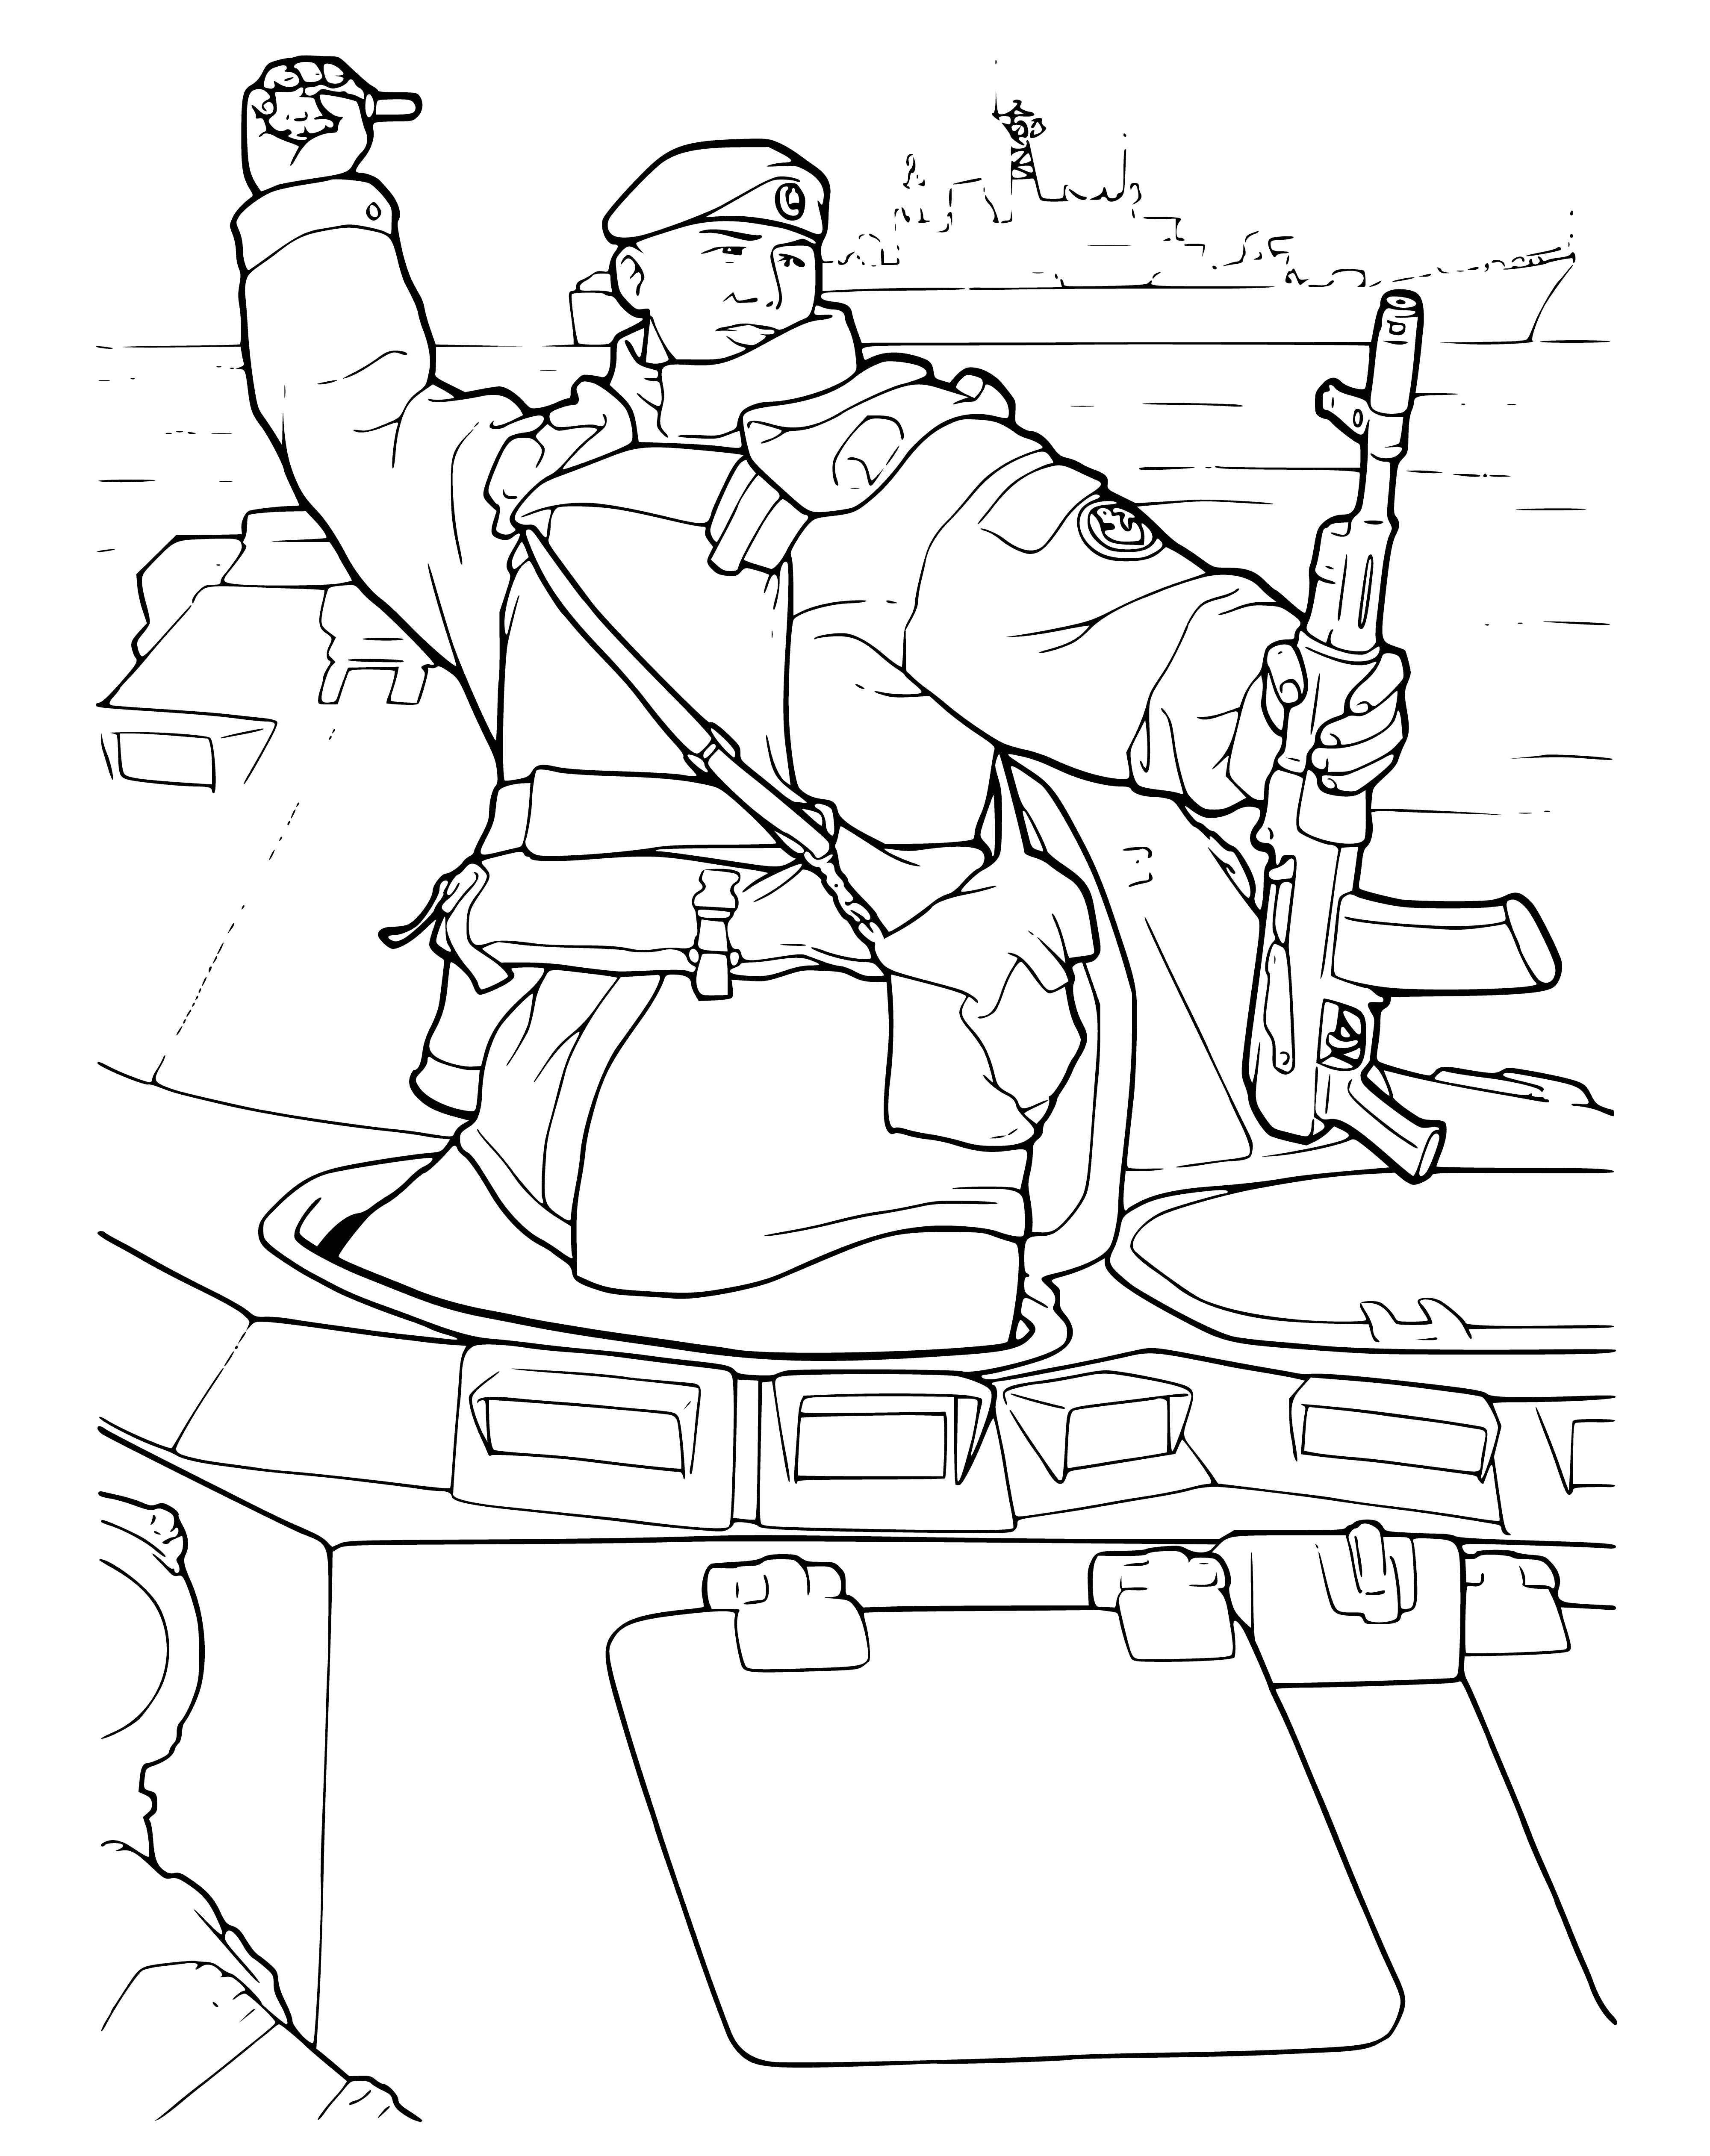 coloring page: The Army is America's protector and defender, comprised of the Marine Corps, Navy, Air Force, and Coast Guard, highly trained and prepared to respond to any threat.